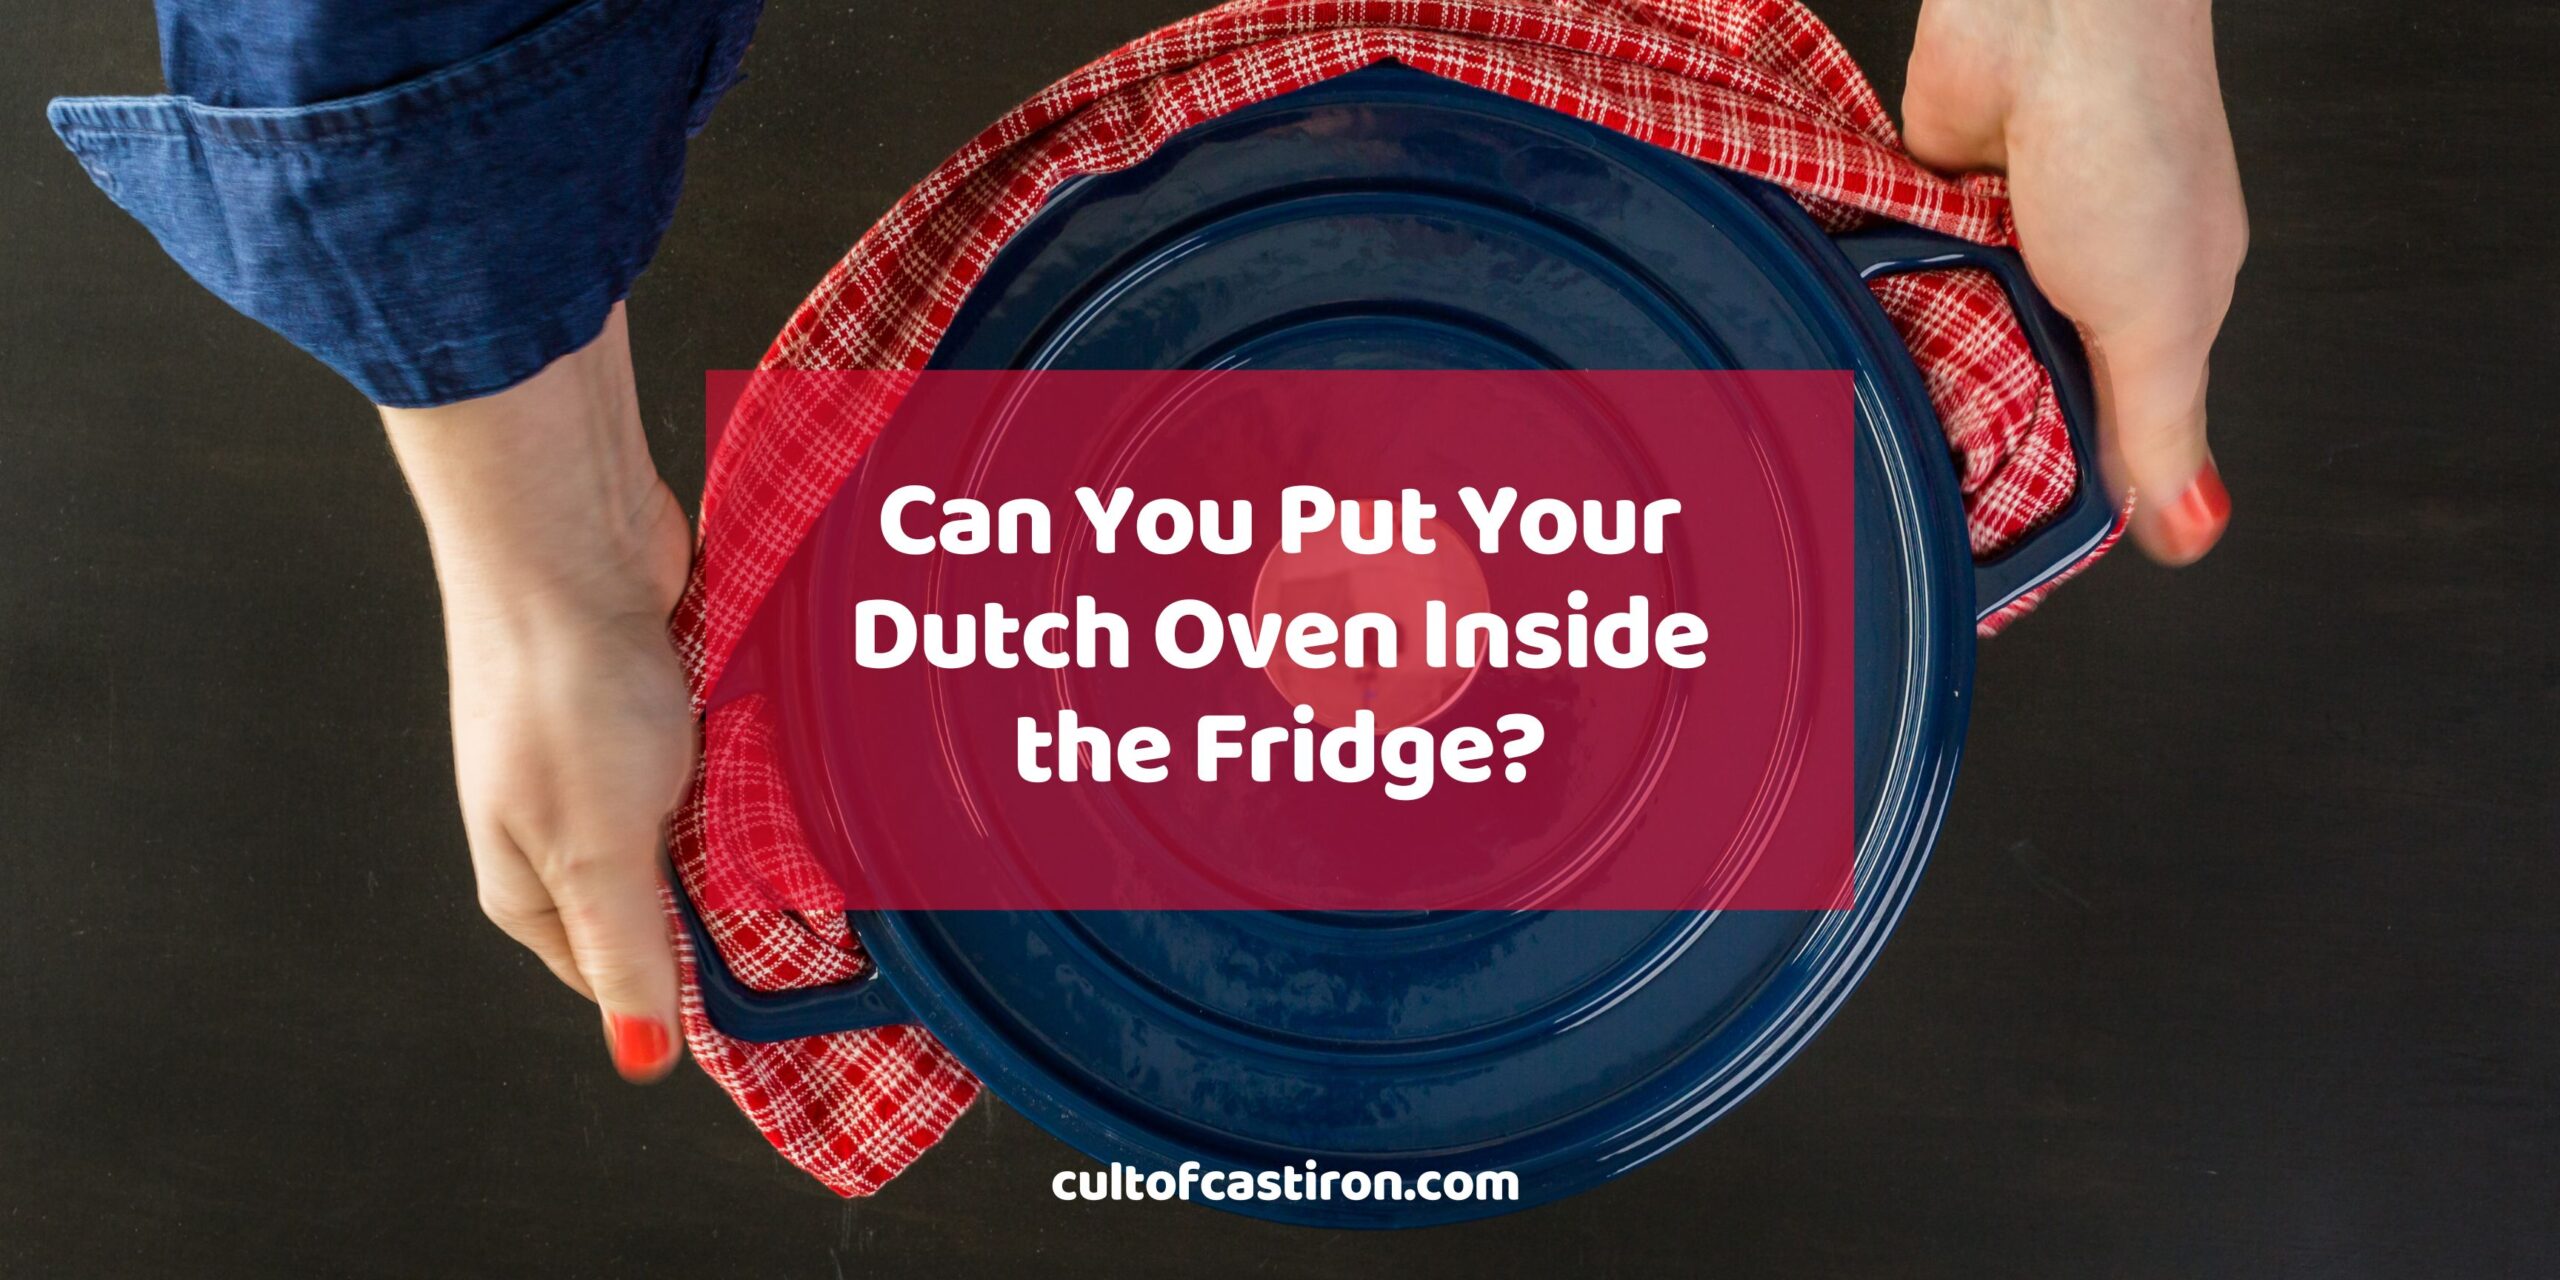 Can You Put Your Dutch Oven Inside the Fridge Banner